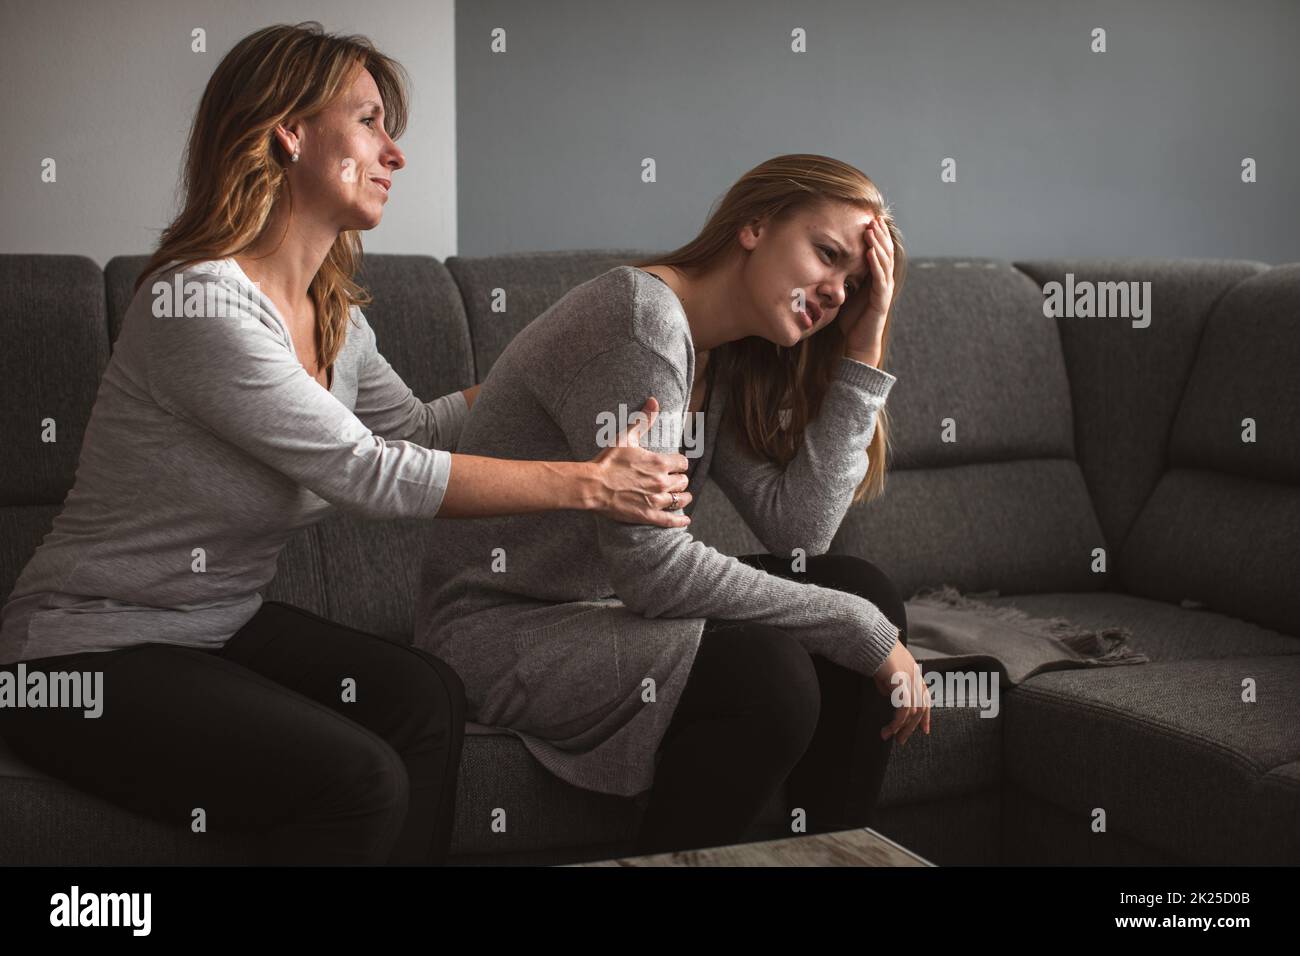 Depressed teen suffering from anxiety being taken care of by her caring mother Stock Photo